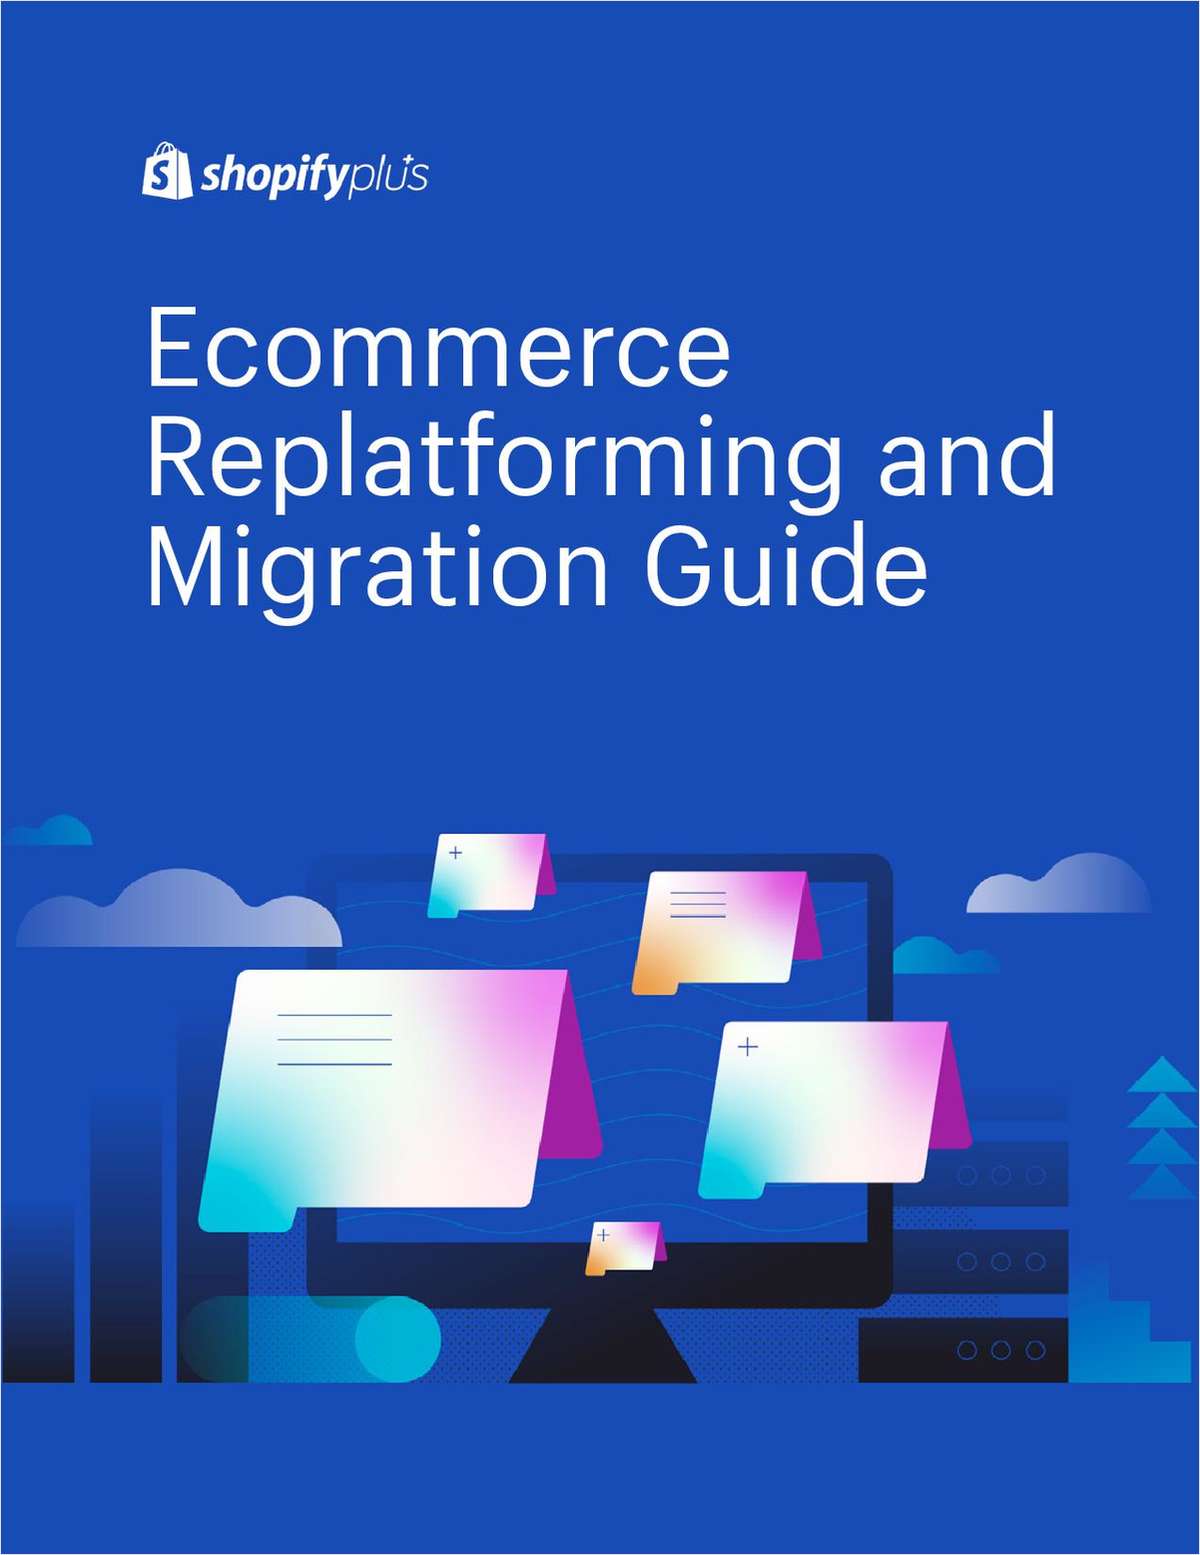 w thfd03c8 - Everything You Need to Effectively Navigate Ecommerce Migration and Replatforming